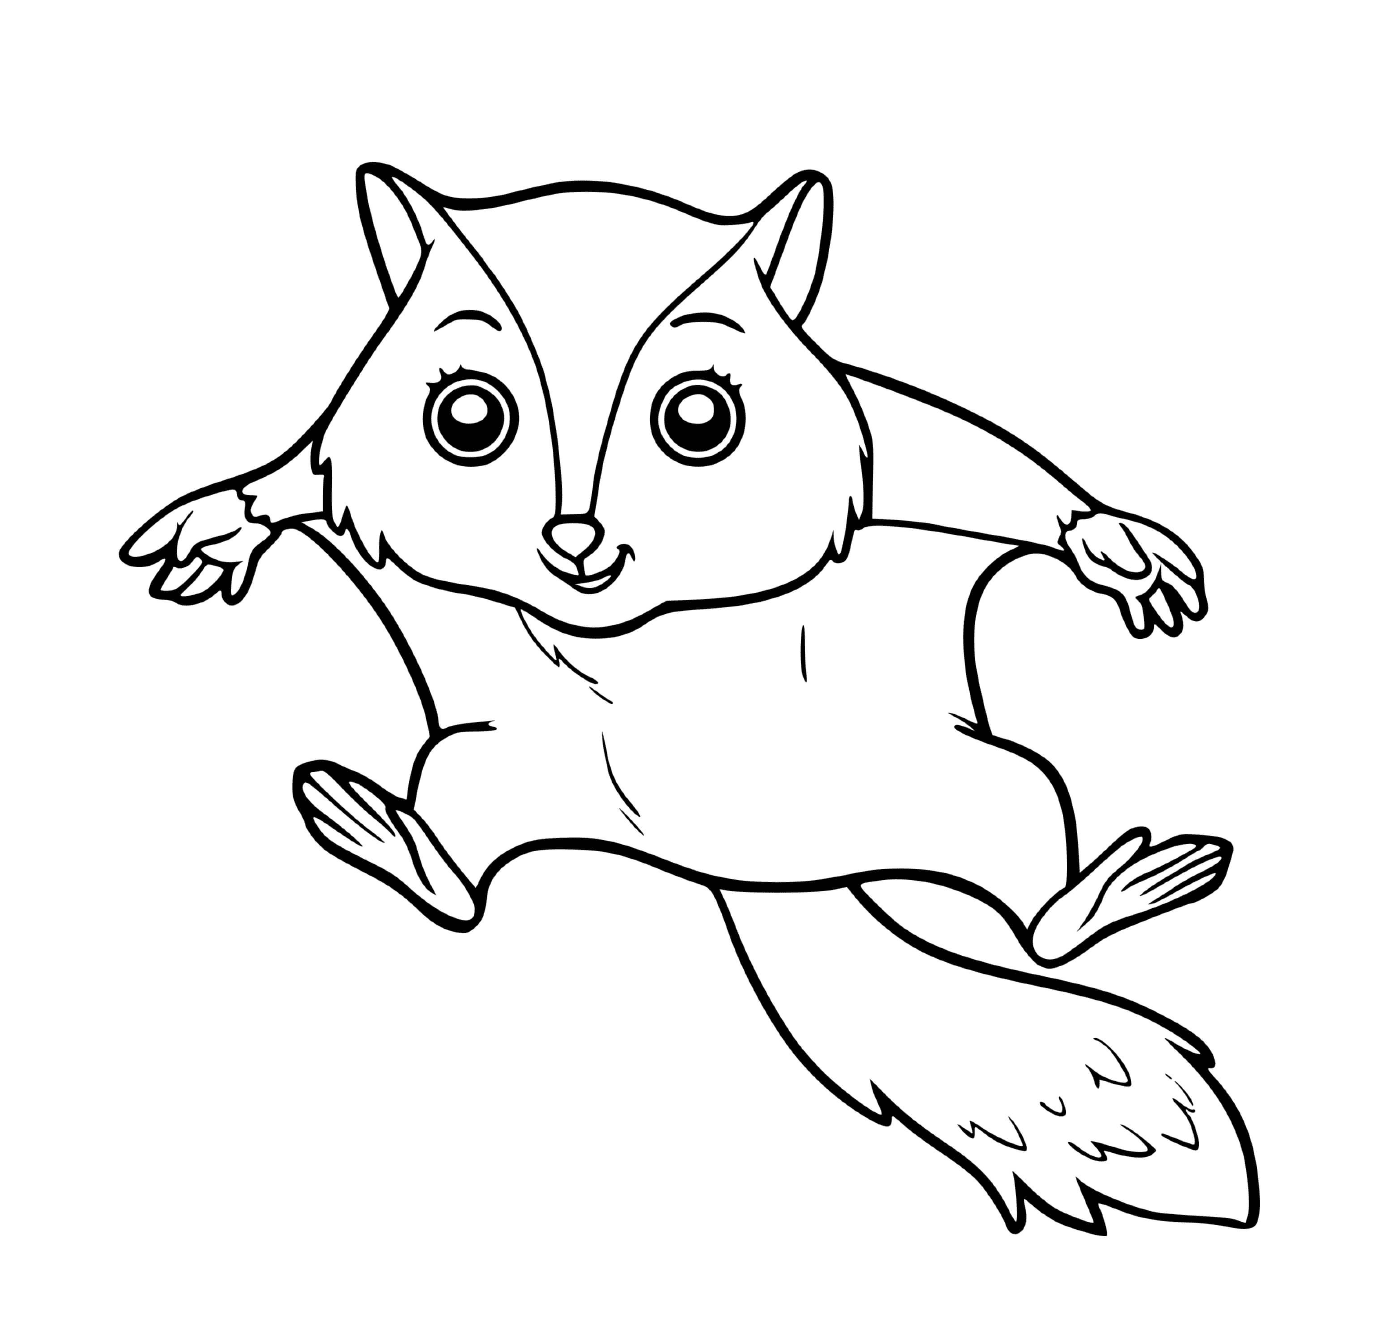  The flying squirrel glider 